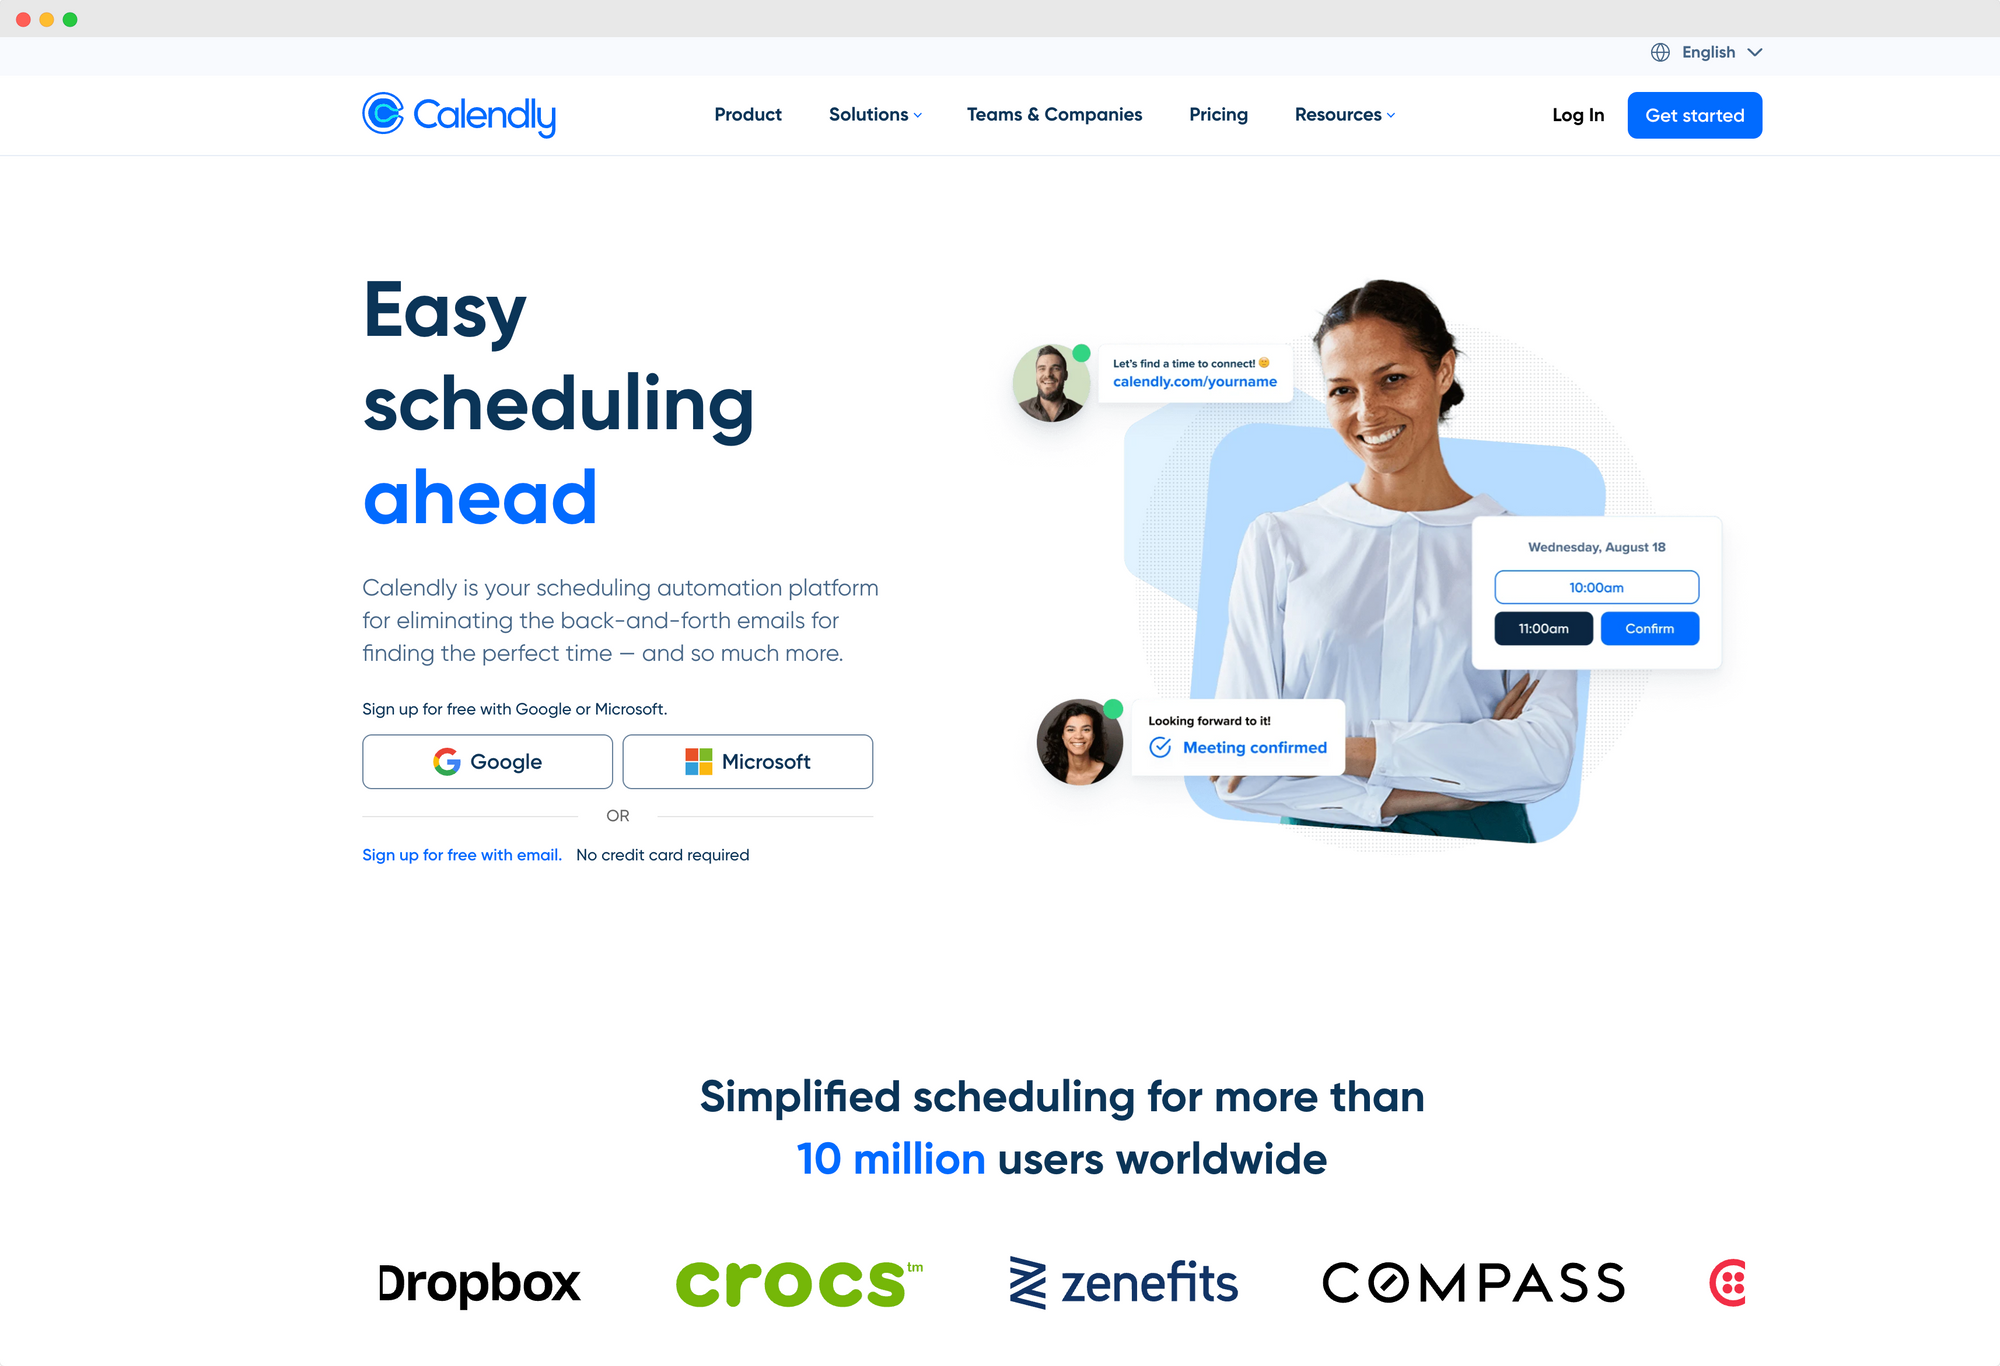 Calendly homepage showcasing easy scheduling features and user testimonials